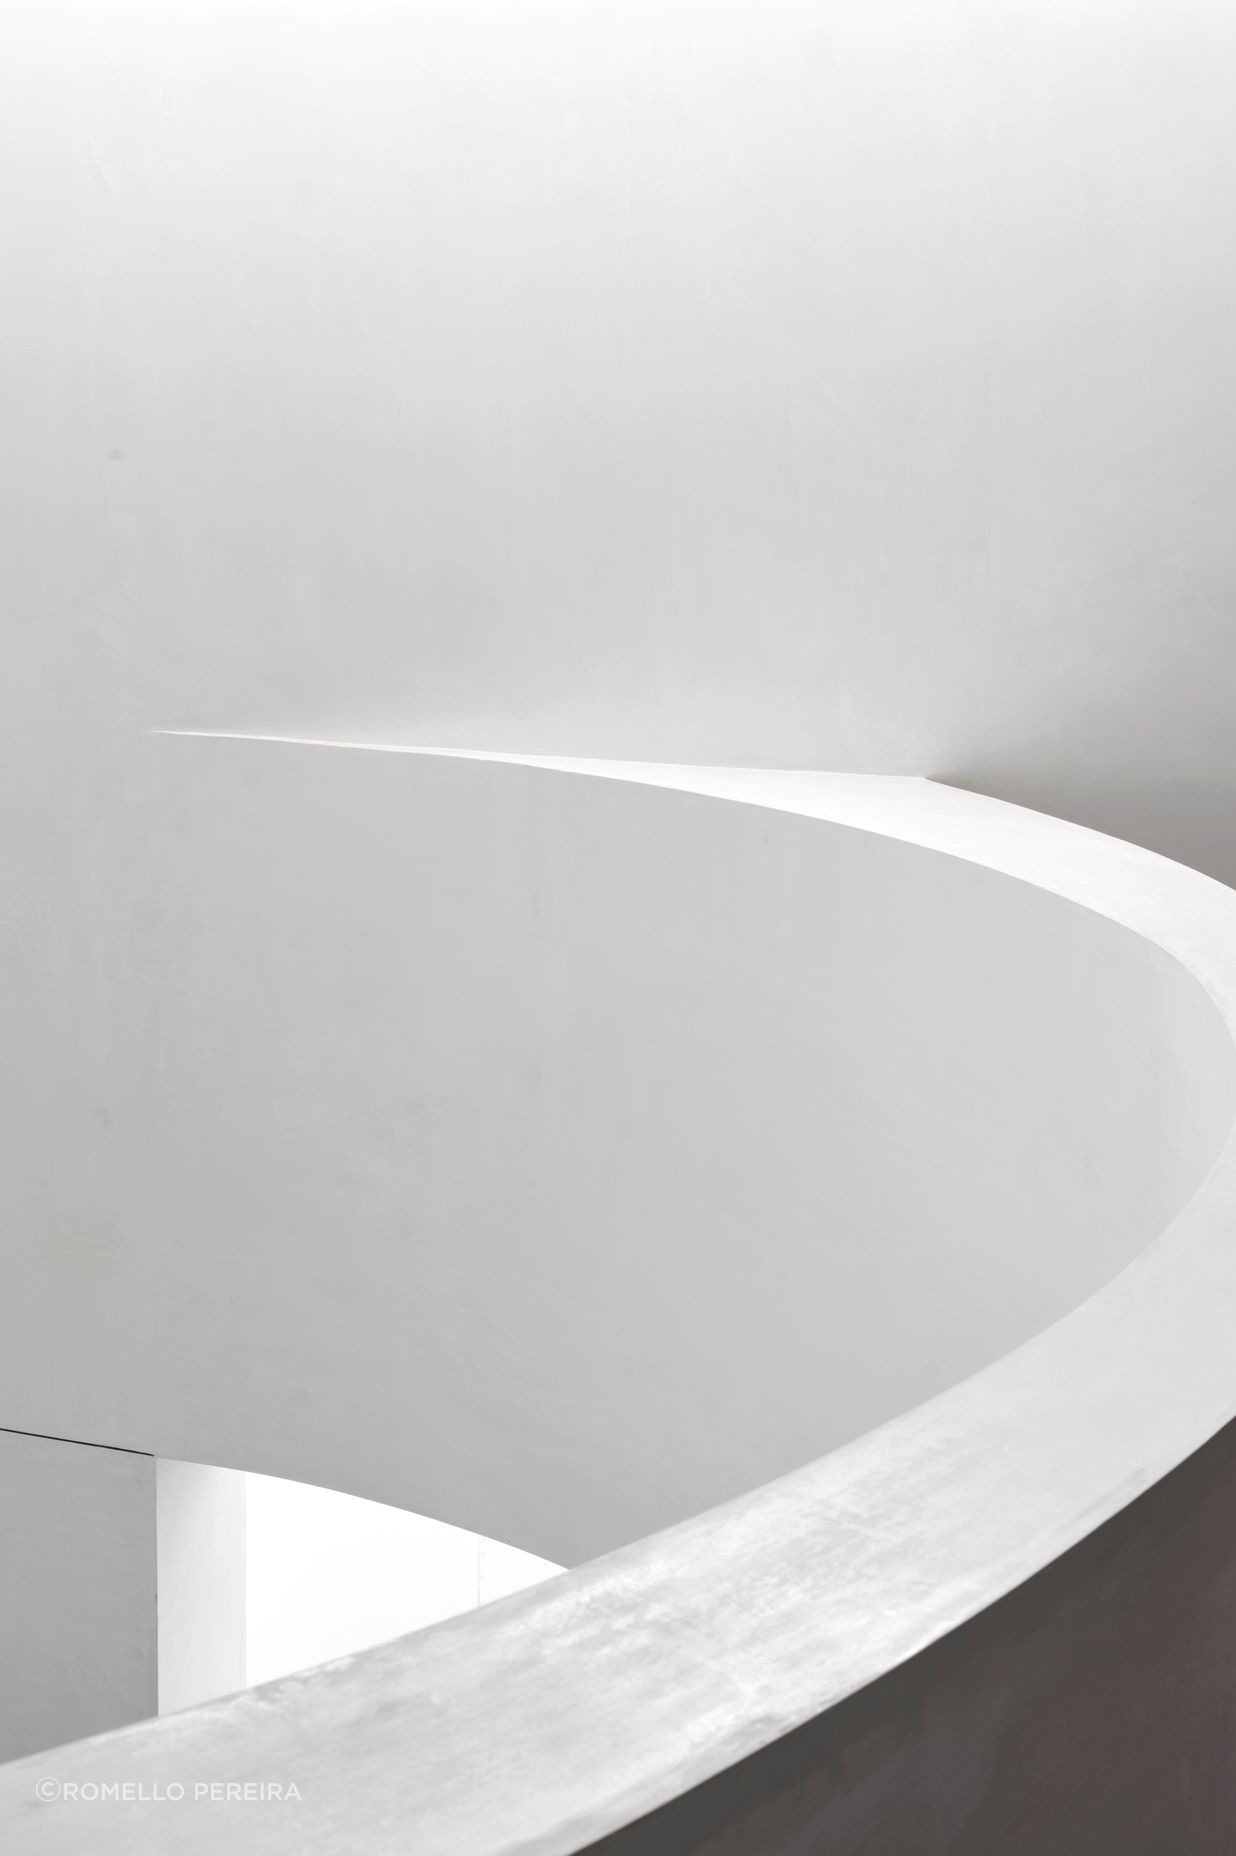 The curve of the mezzanine banister creates a strong gestural move in the new space.